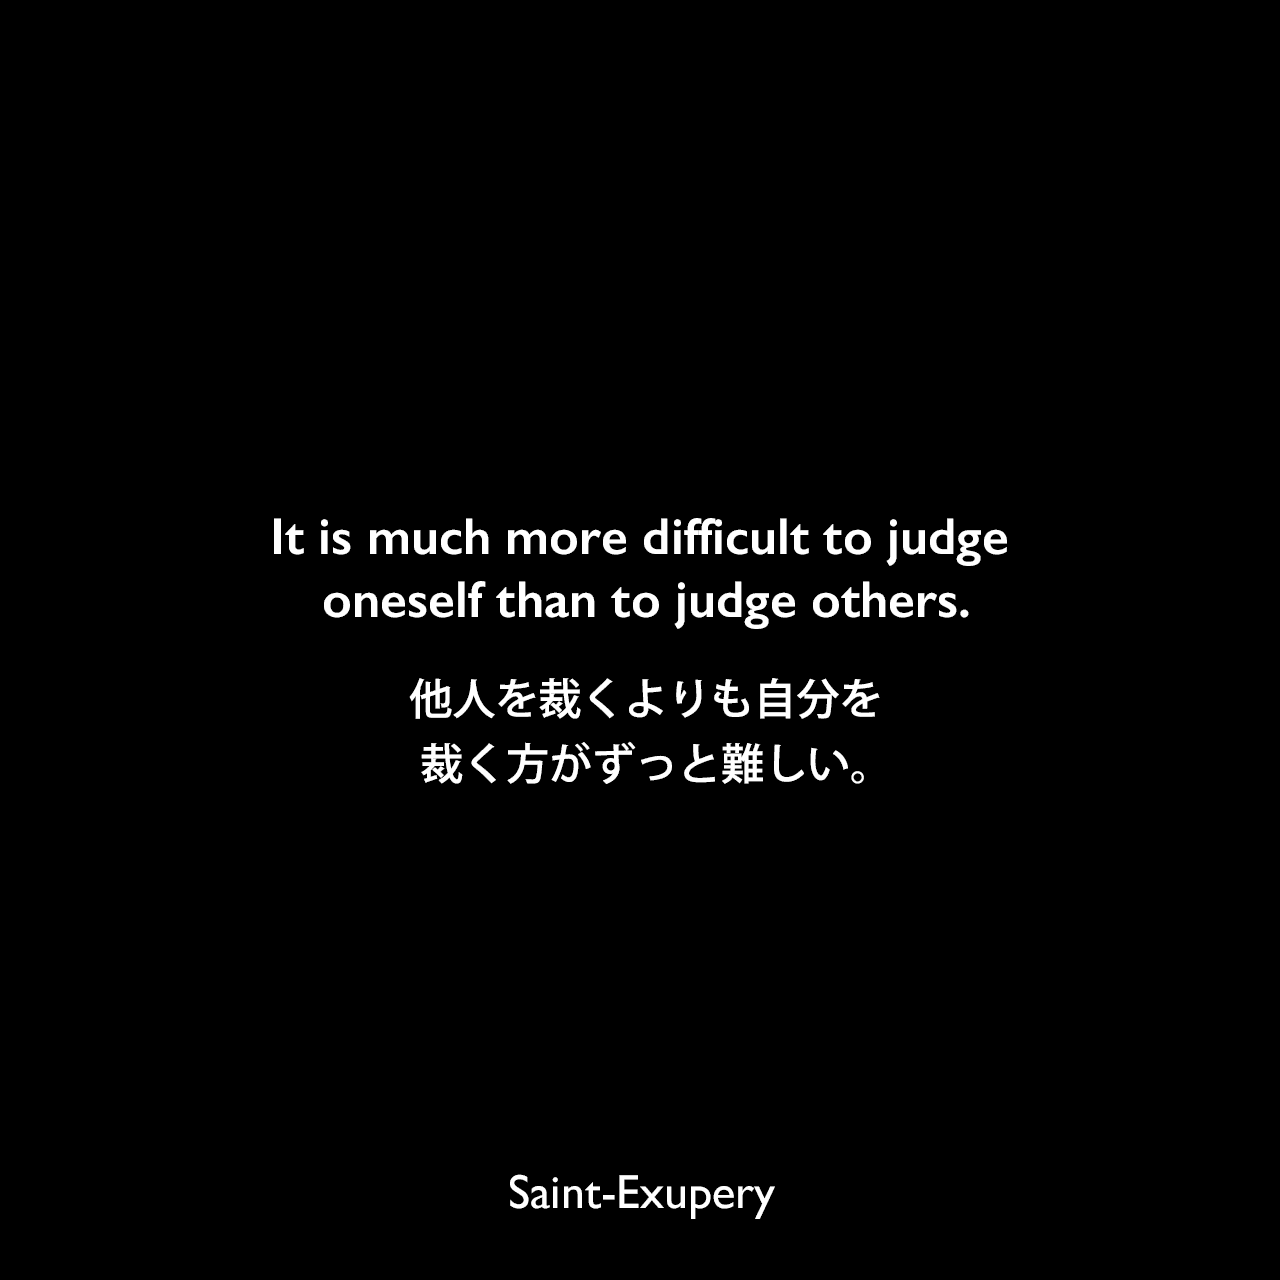 It is much more difficult to judge oneself than to judge others.他人を裁くよりも自分を裁く方がずっと難しい。Saint-Exupery